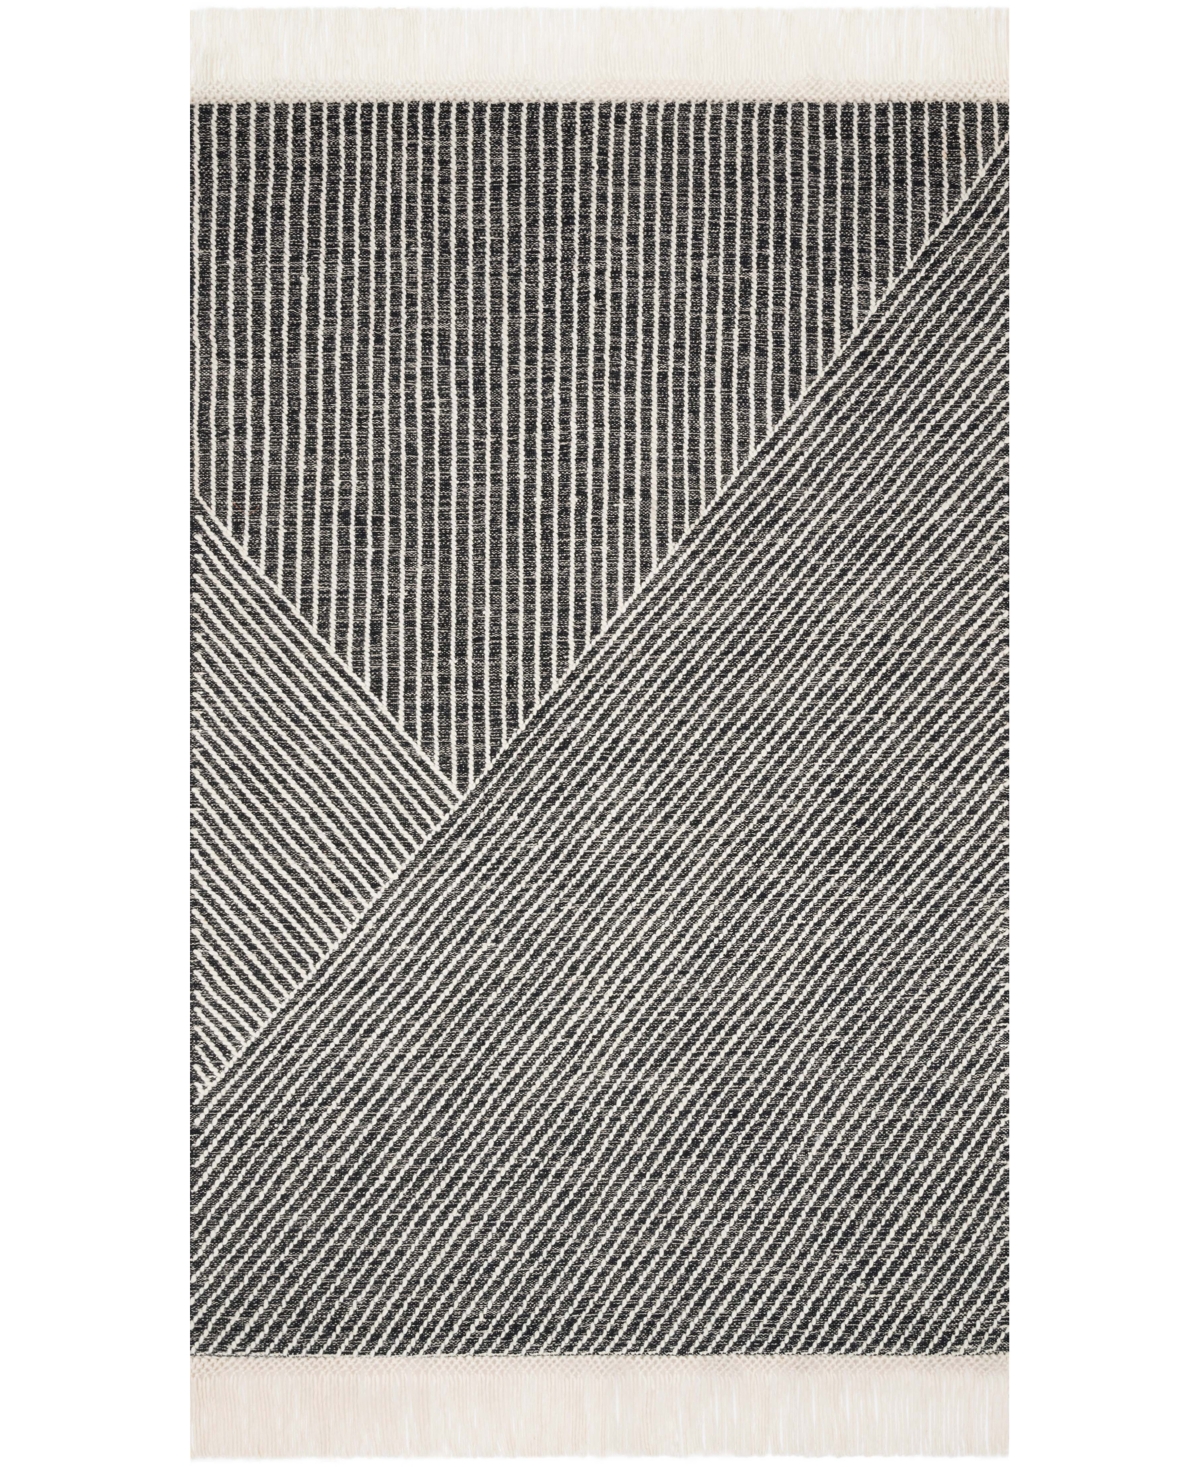 Magnolia Home By Joanna Gaines X Loloi Newton Net-01 5' X 7'6" Area Rug In Charcoal